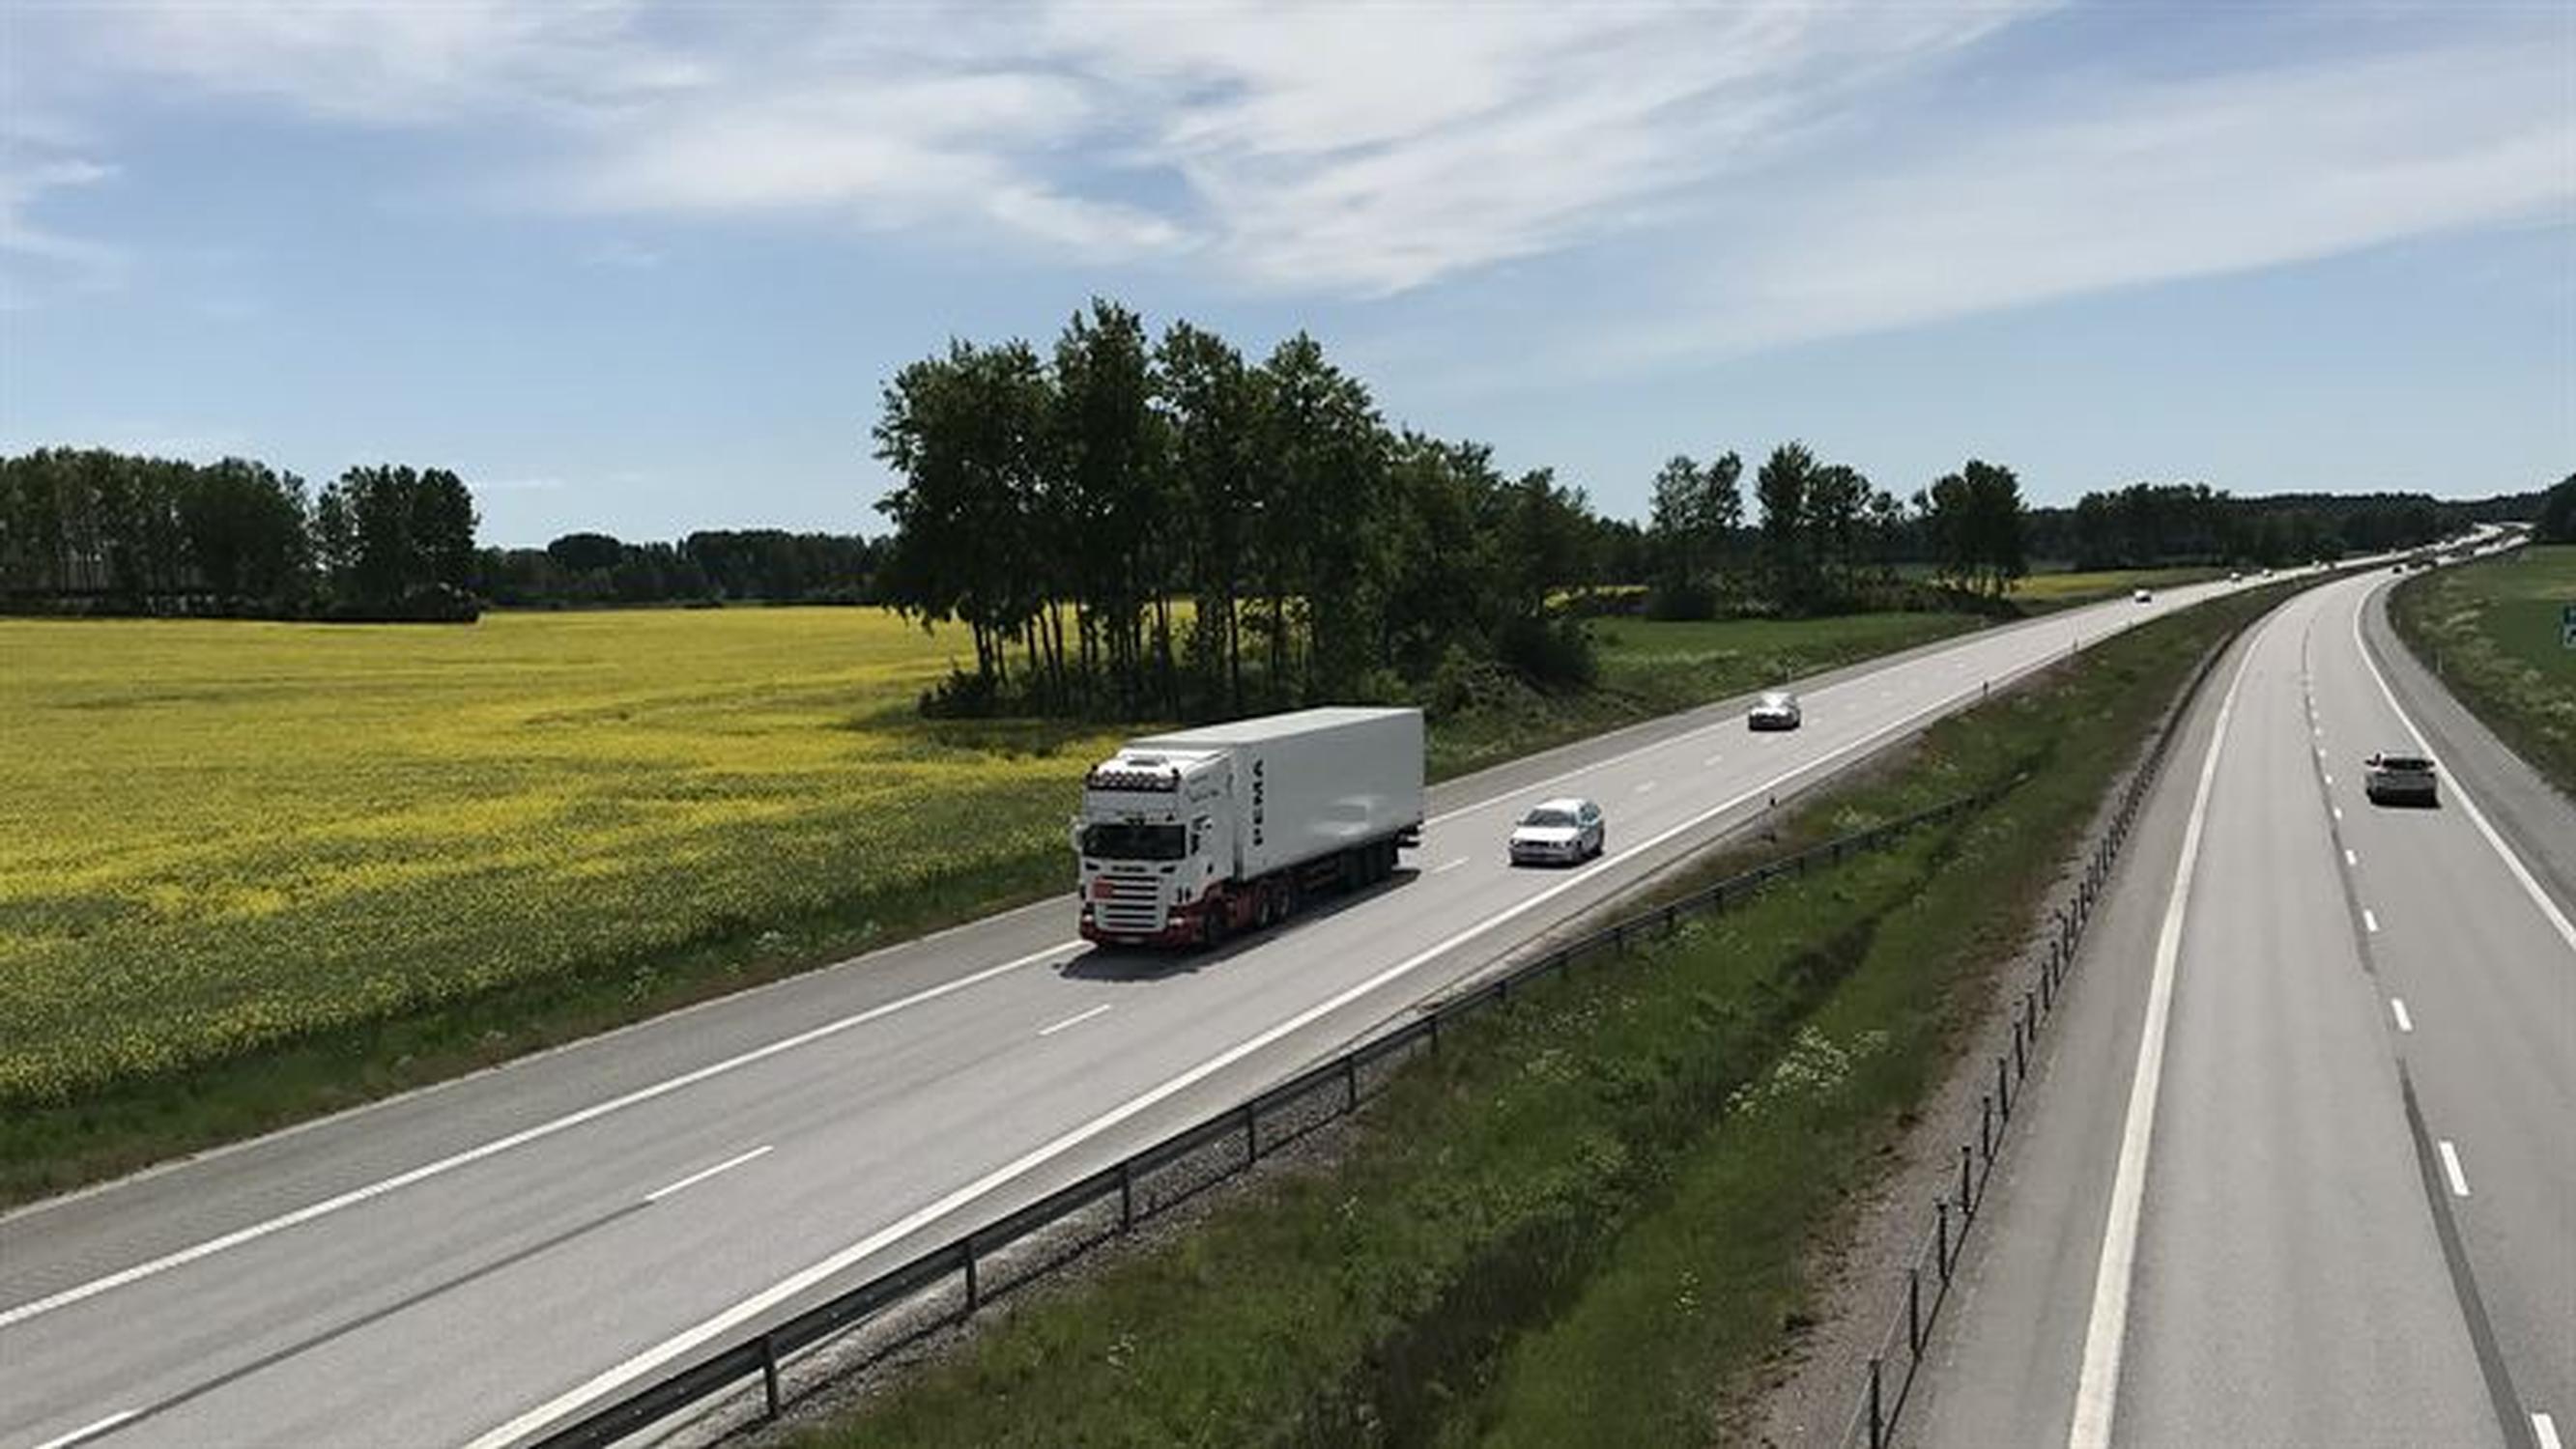 When vehicles can be charged dynamically while driving, the battery size can be reduced and still meet all travel demands. This results in lower environmental impact and costs, according to new research from Chalmers. In Sweden, the first electric road will be a 21-kilometre stretch between Örebro and Hallsberg. The Swedish Transport Administration is leading the project and the road is expected to be completed by 2026. It has not yet been decided which type of charging technology will be used (Swedish Transport Administration/WSP)